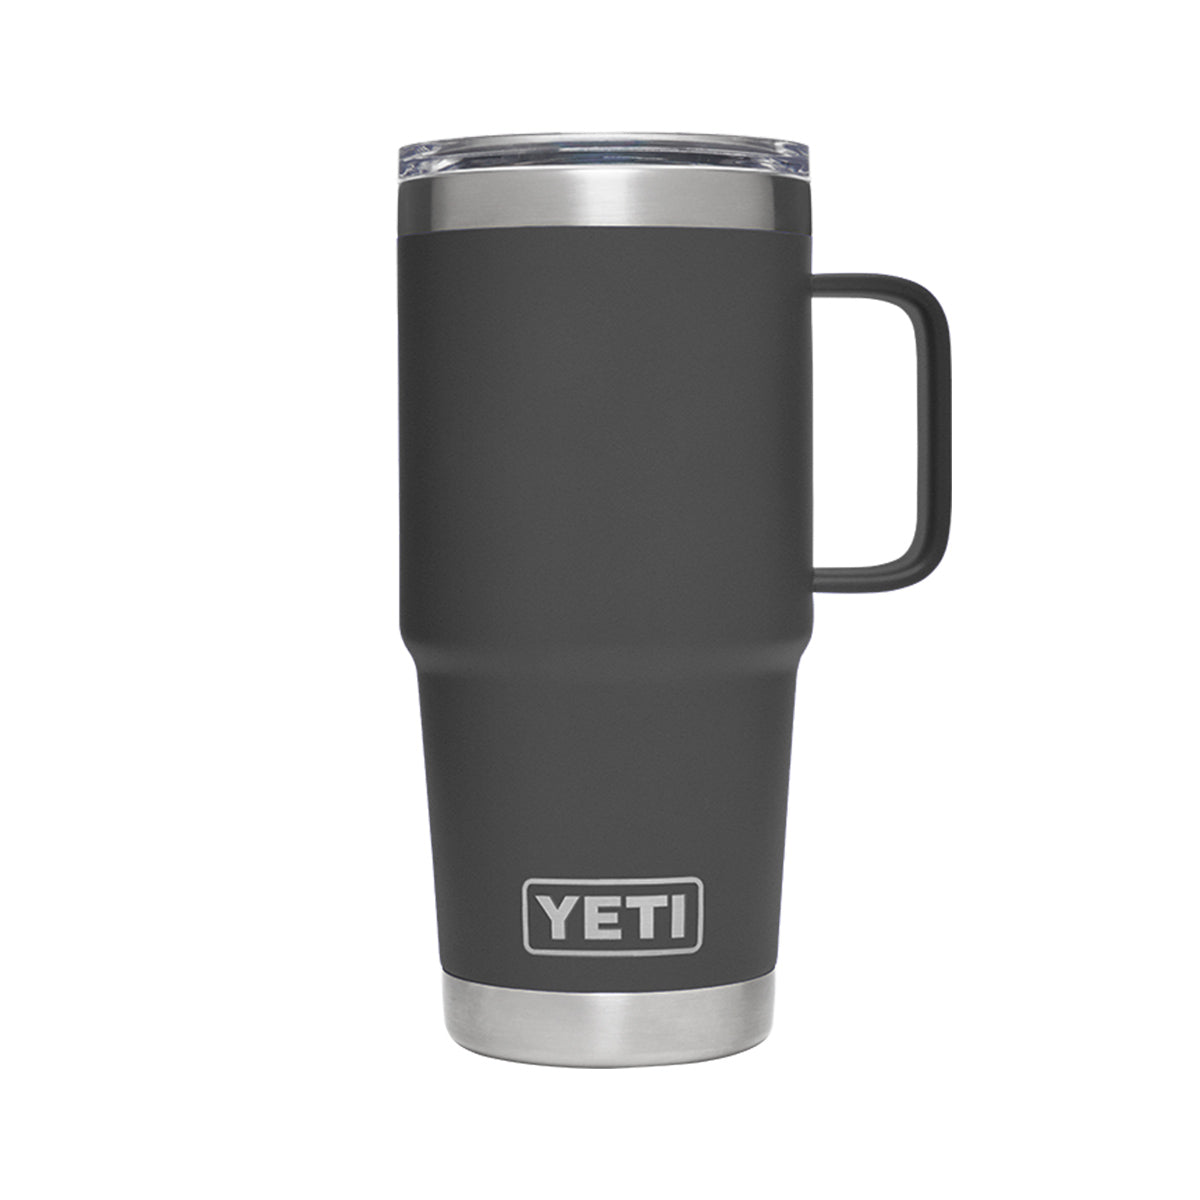 YETI Rambler 20 Oz Travel Mug with StrongHold Lid in Charcoal